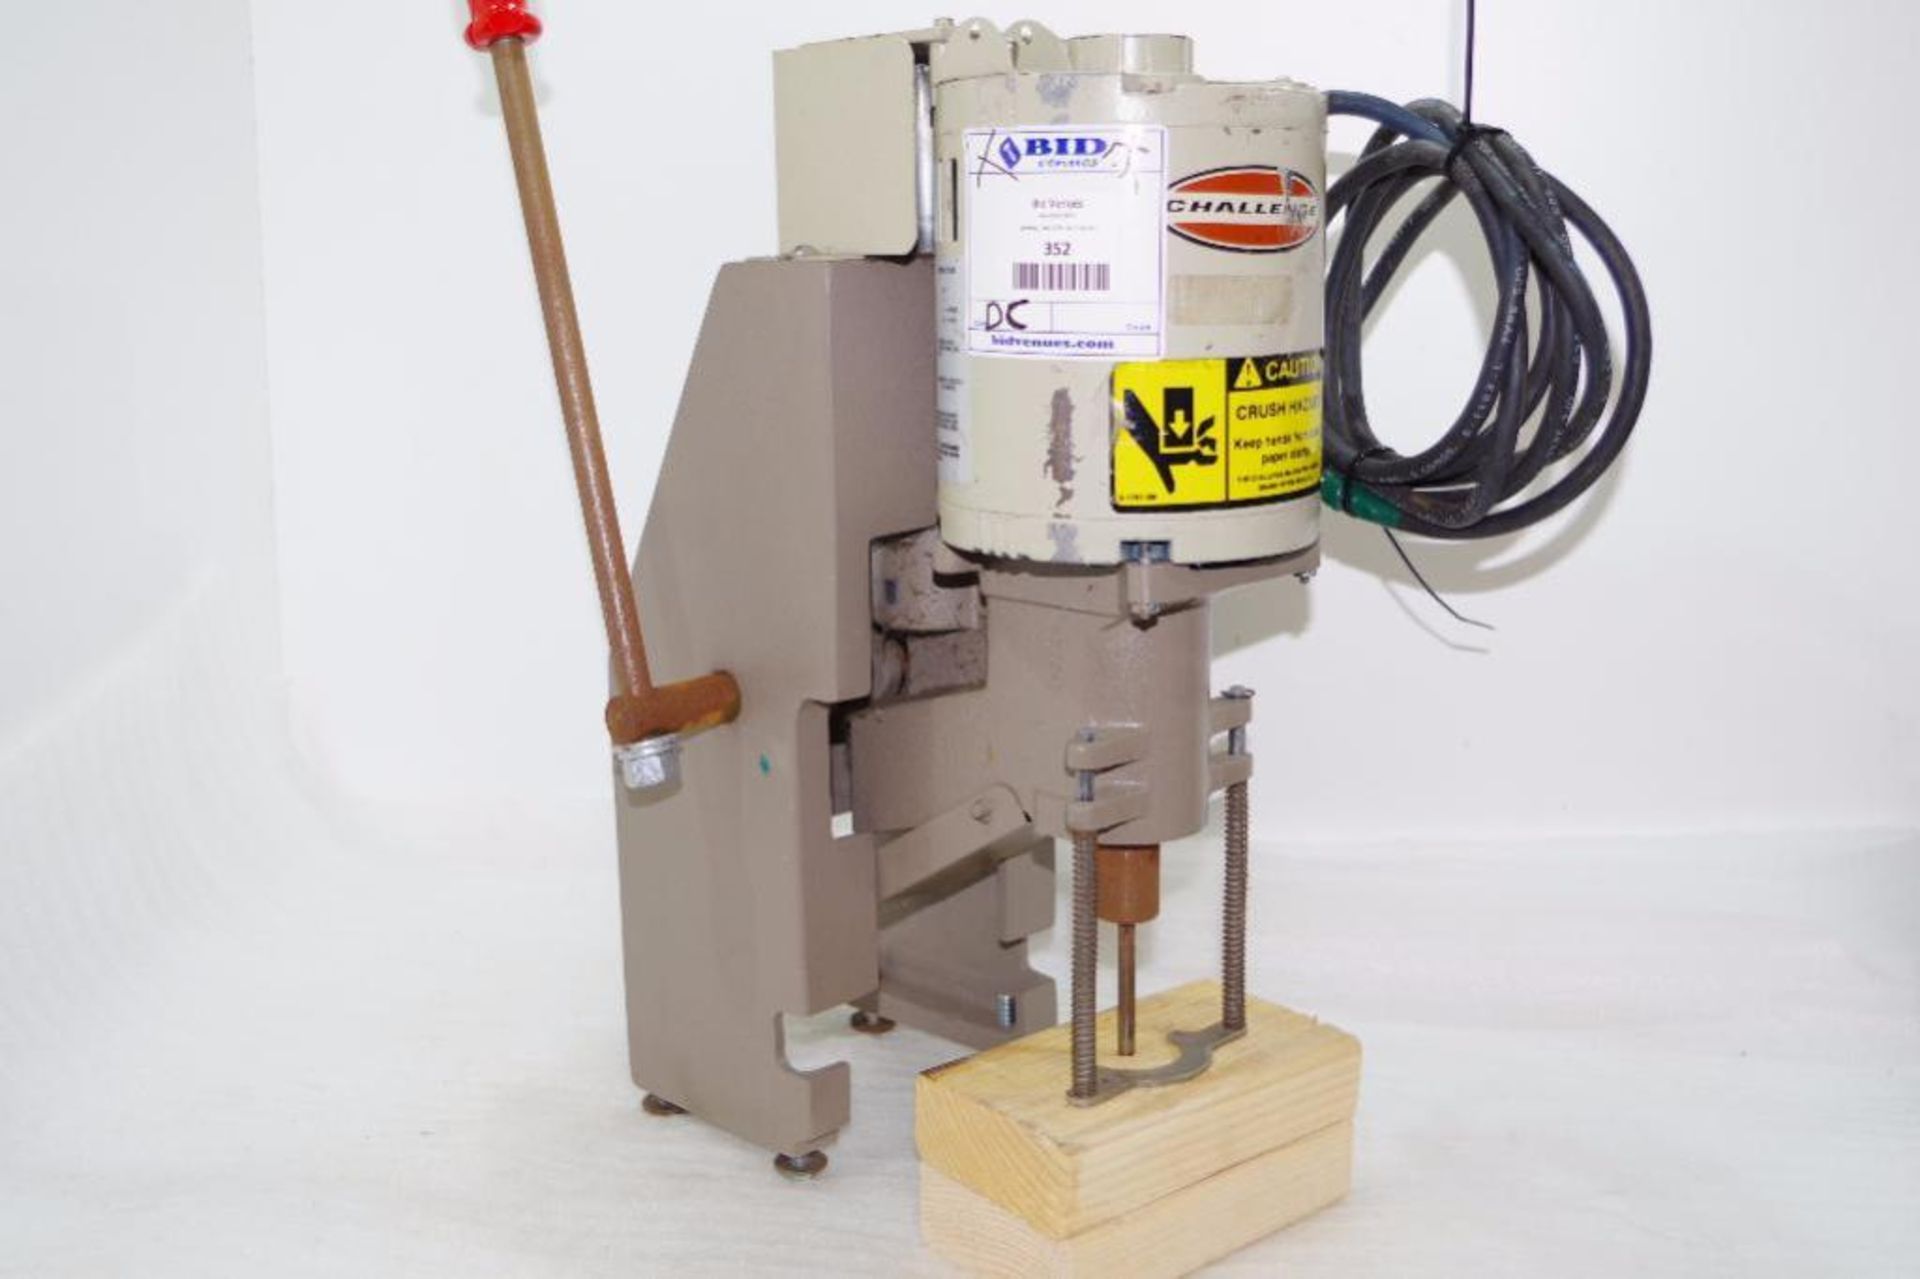 CHALLENGE Paper Drill 115V, 5.4A, PH1, M/N JO, Made in USA